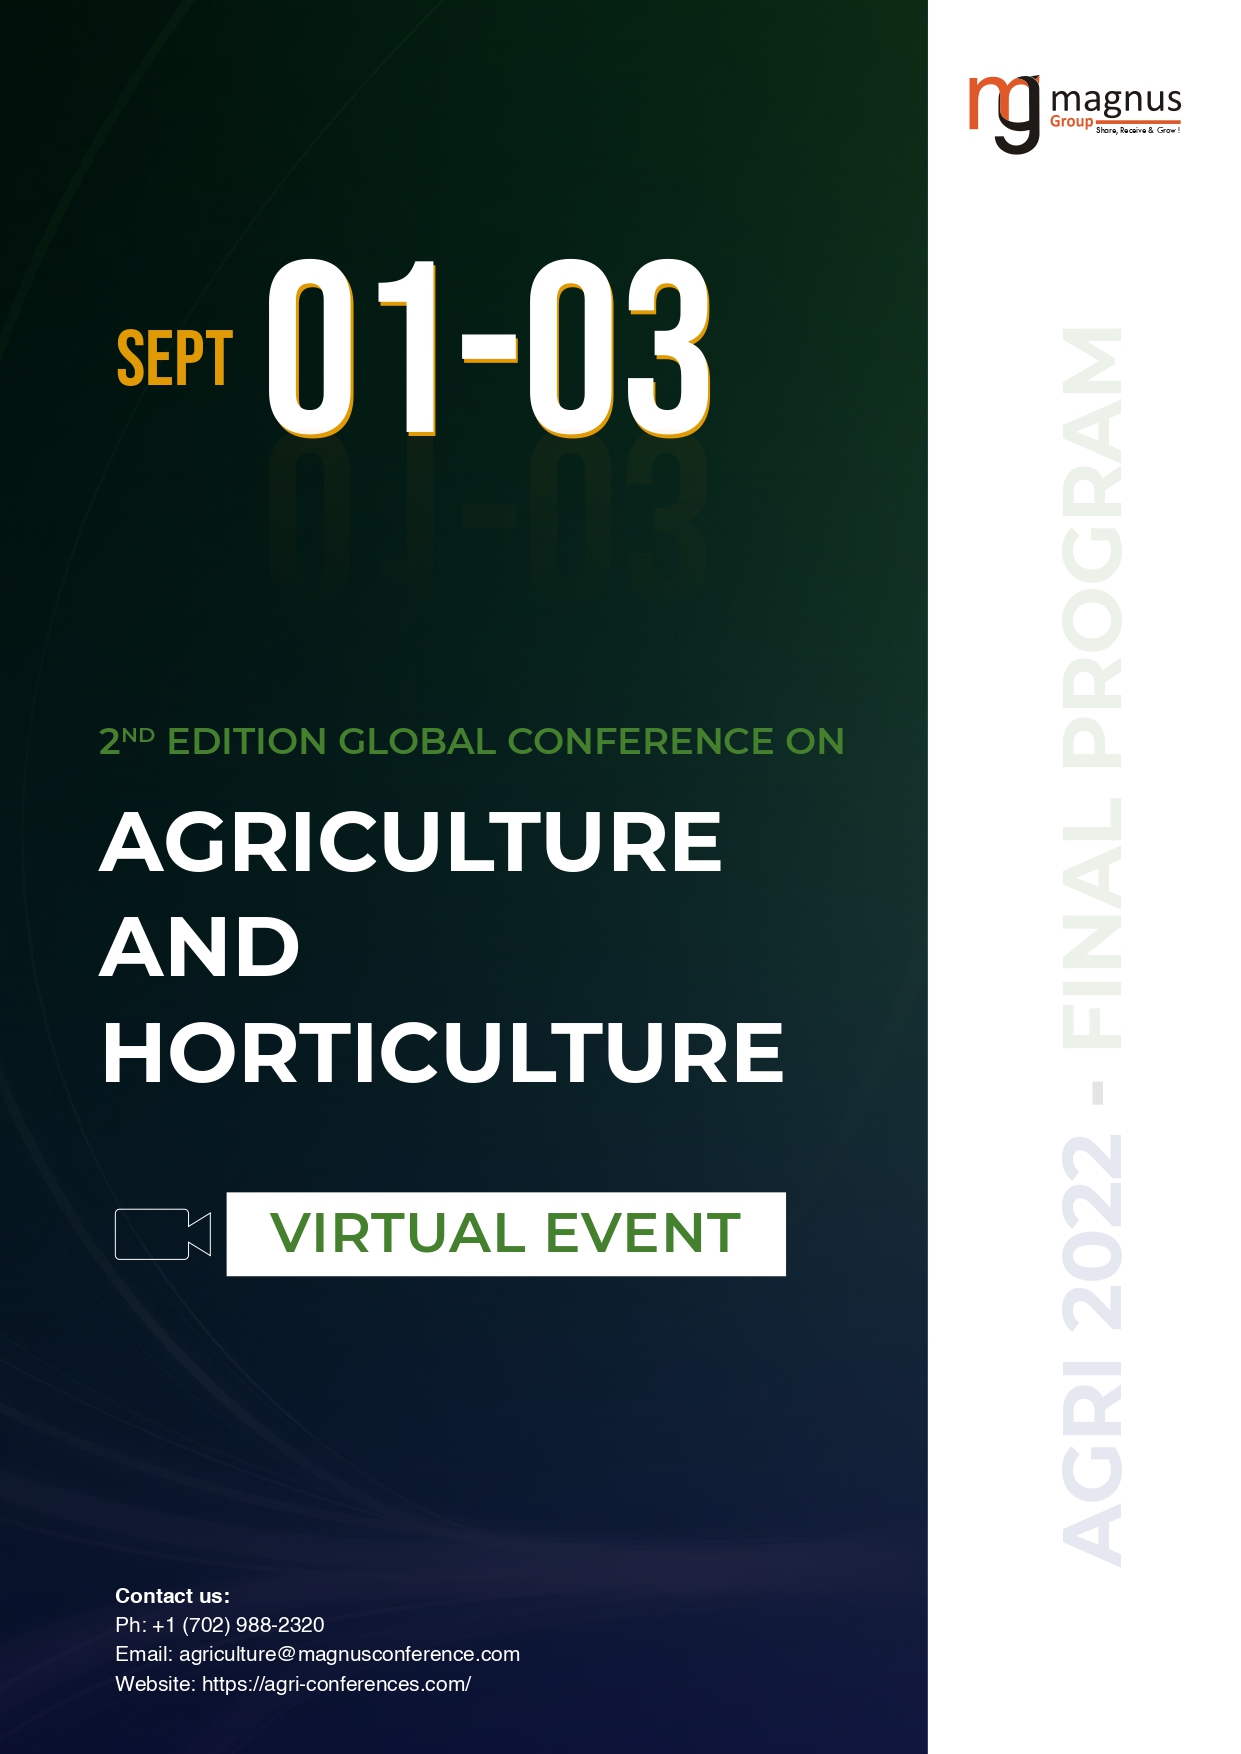 2nd Edition of Global Conference on Agriculture and Horticulture | Online Event Program